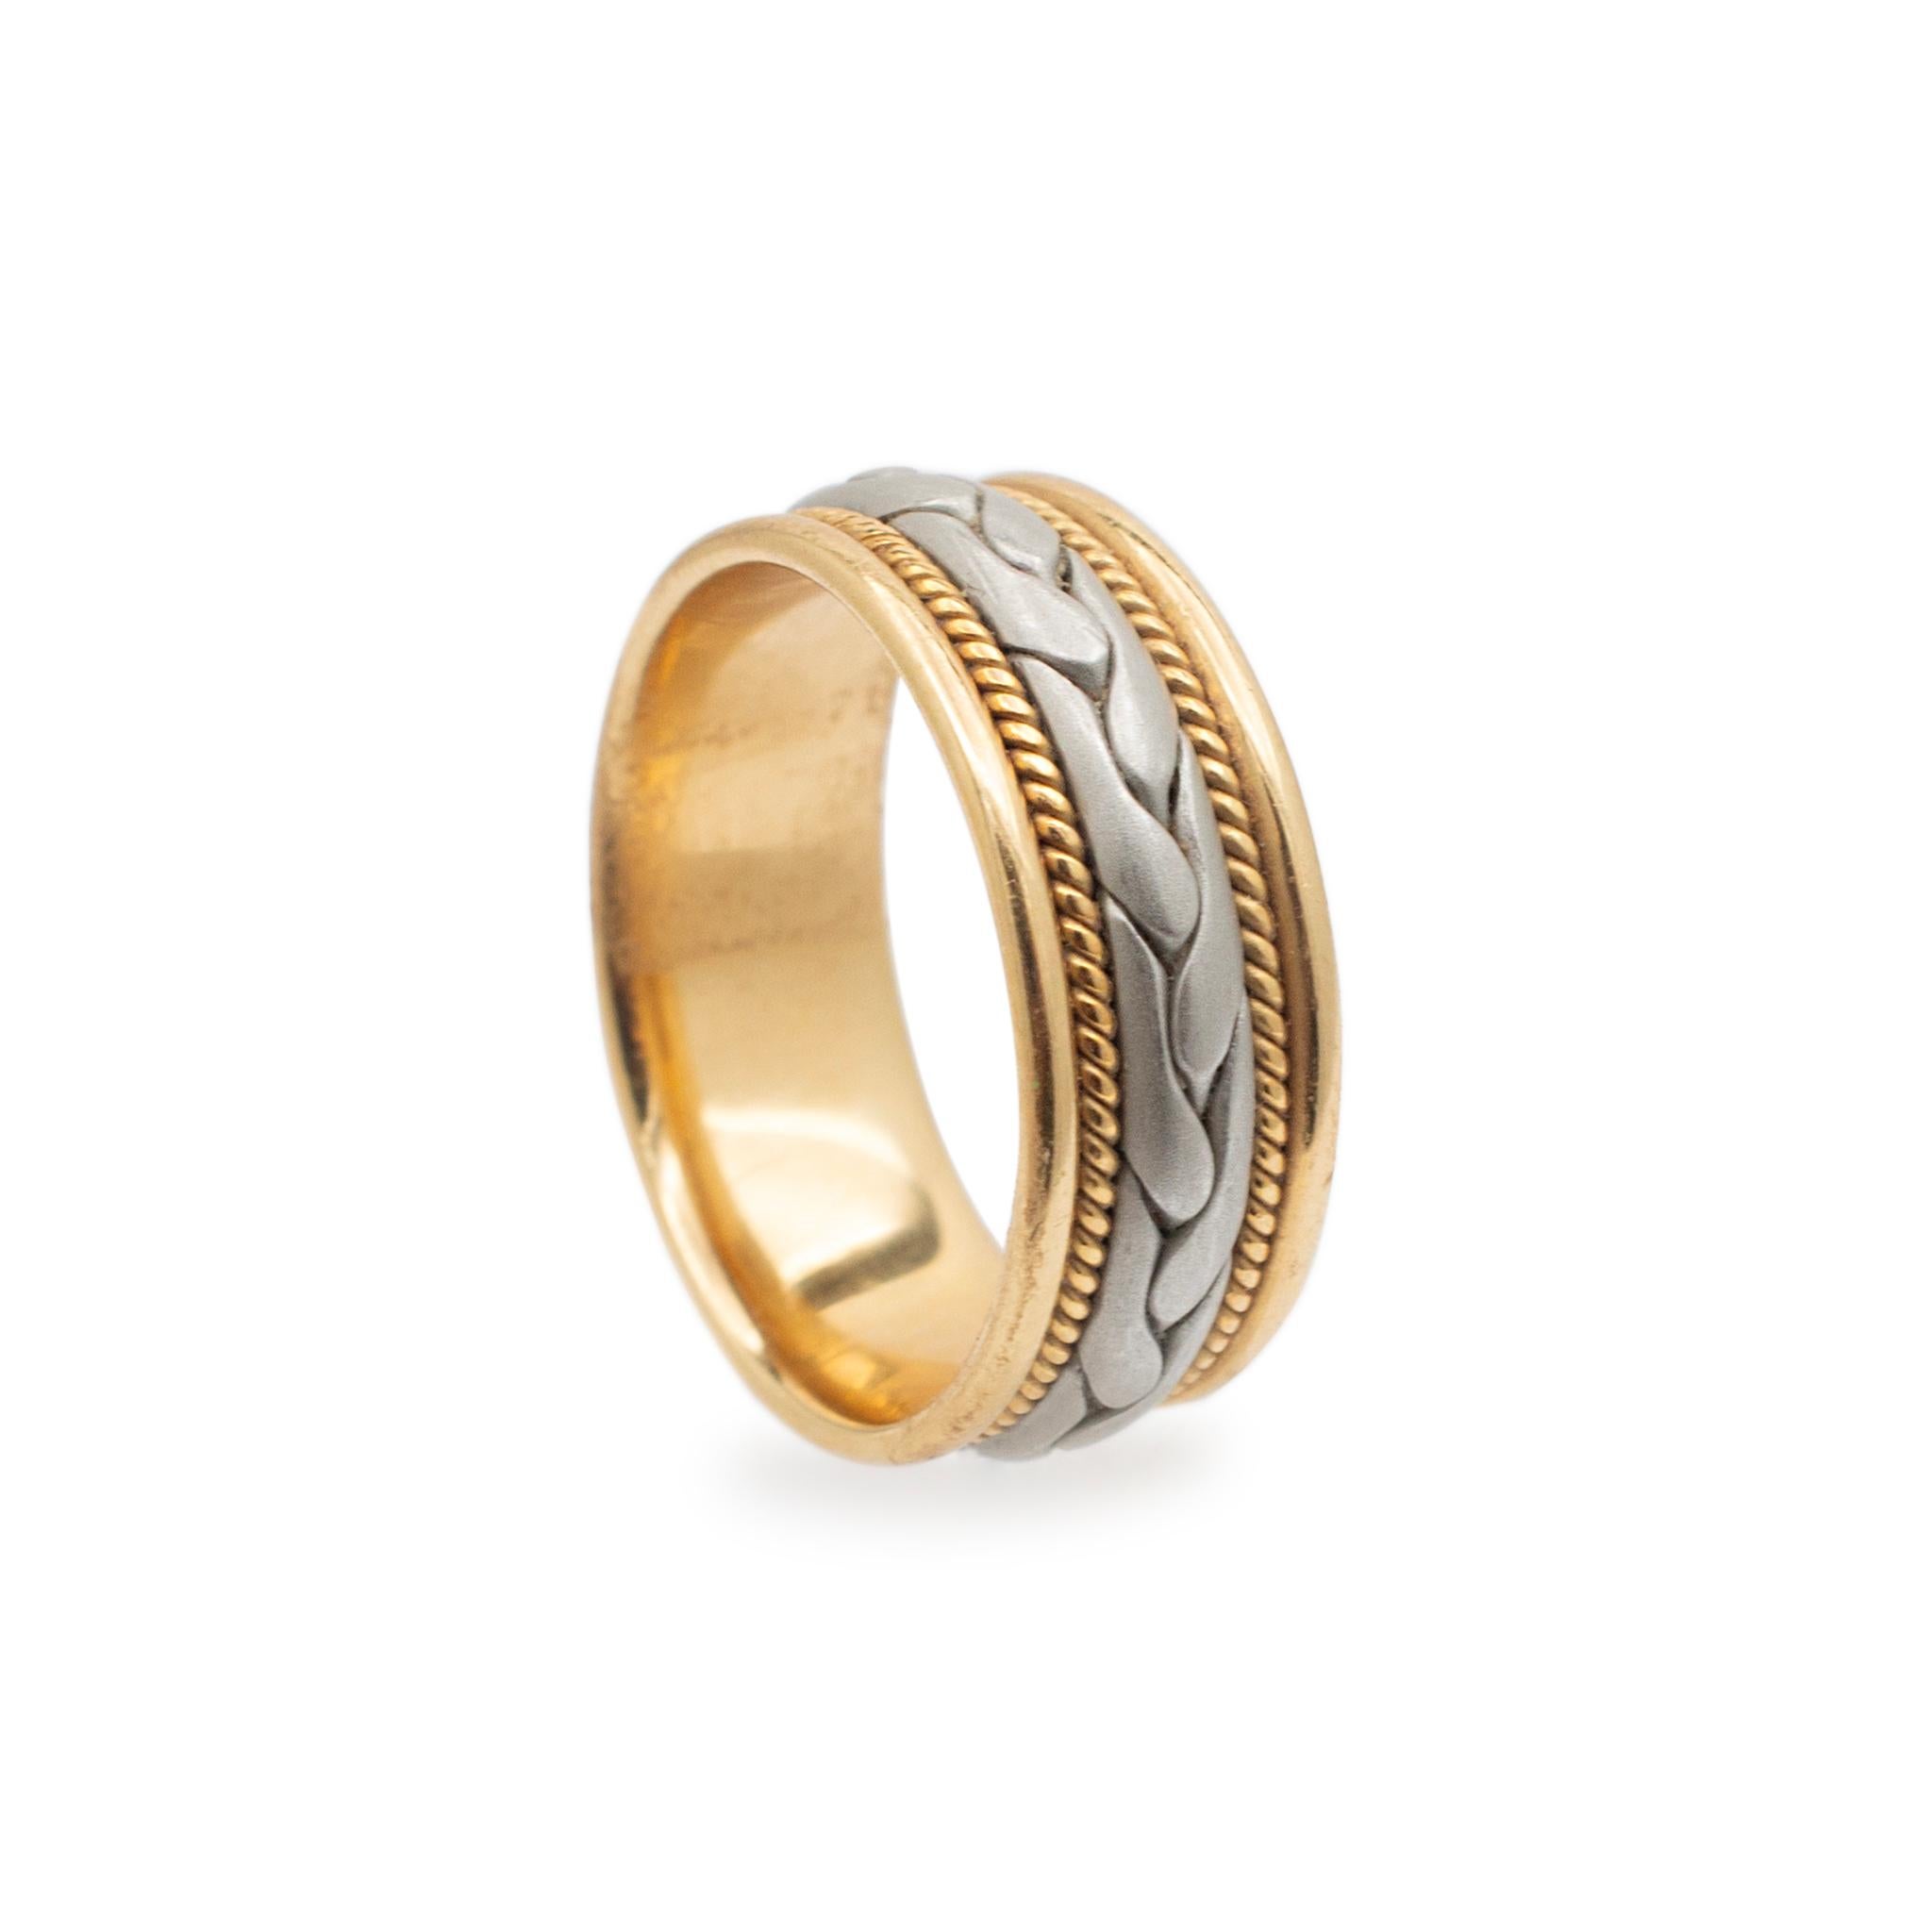 Gender: Unisex

Metal Type: 18K Yellow Gold & 950 Platinum

Size: 8

Shank Maximum Width: 8.00 mm

Weight: 9.80 grams

18K yellow gold and 950 platinum wedding band with a comfort-fit shank. Engraved with 